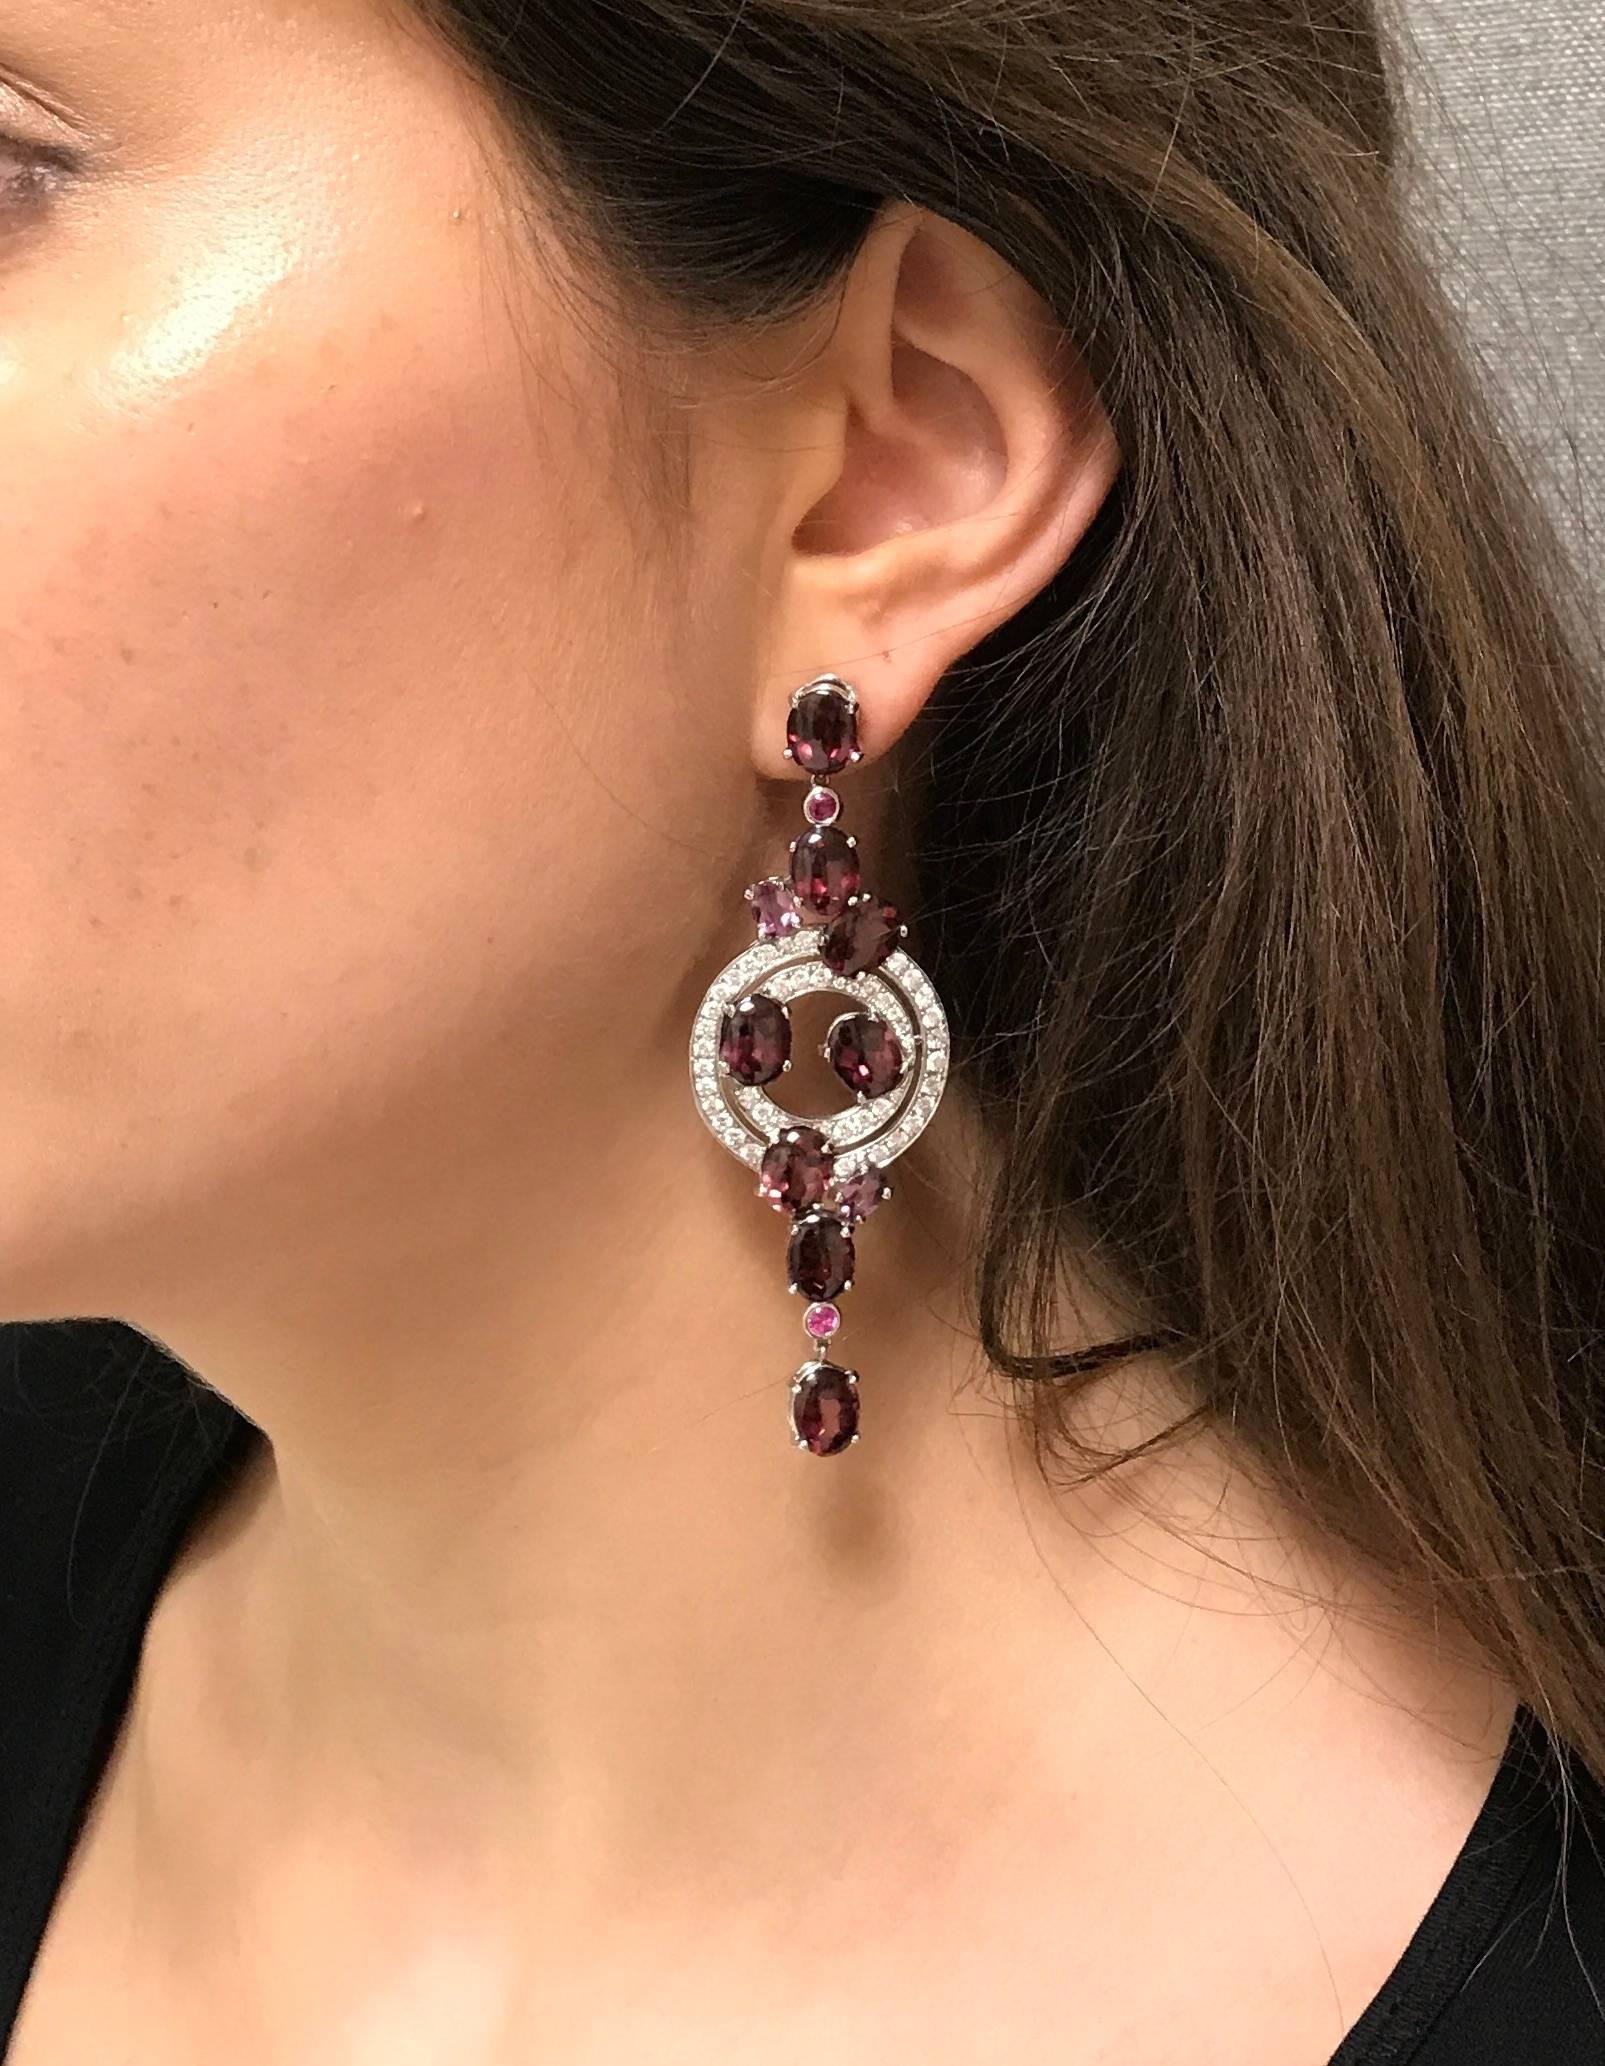 Presented here is a pair of beautiful Rhodolite Garnet, Pink Sapphire and Diamond earrings handcrafted in 18k white gold. These earrings feature 2.44 carats of F/G Color VS Clarity Diamonds pave set in a circular motif and accented with prong set